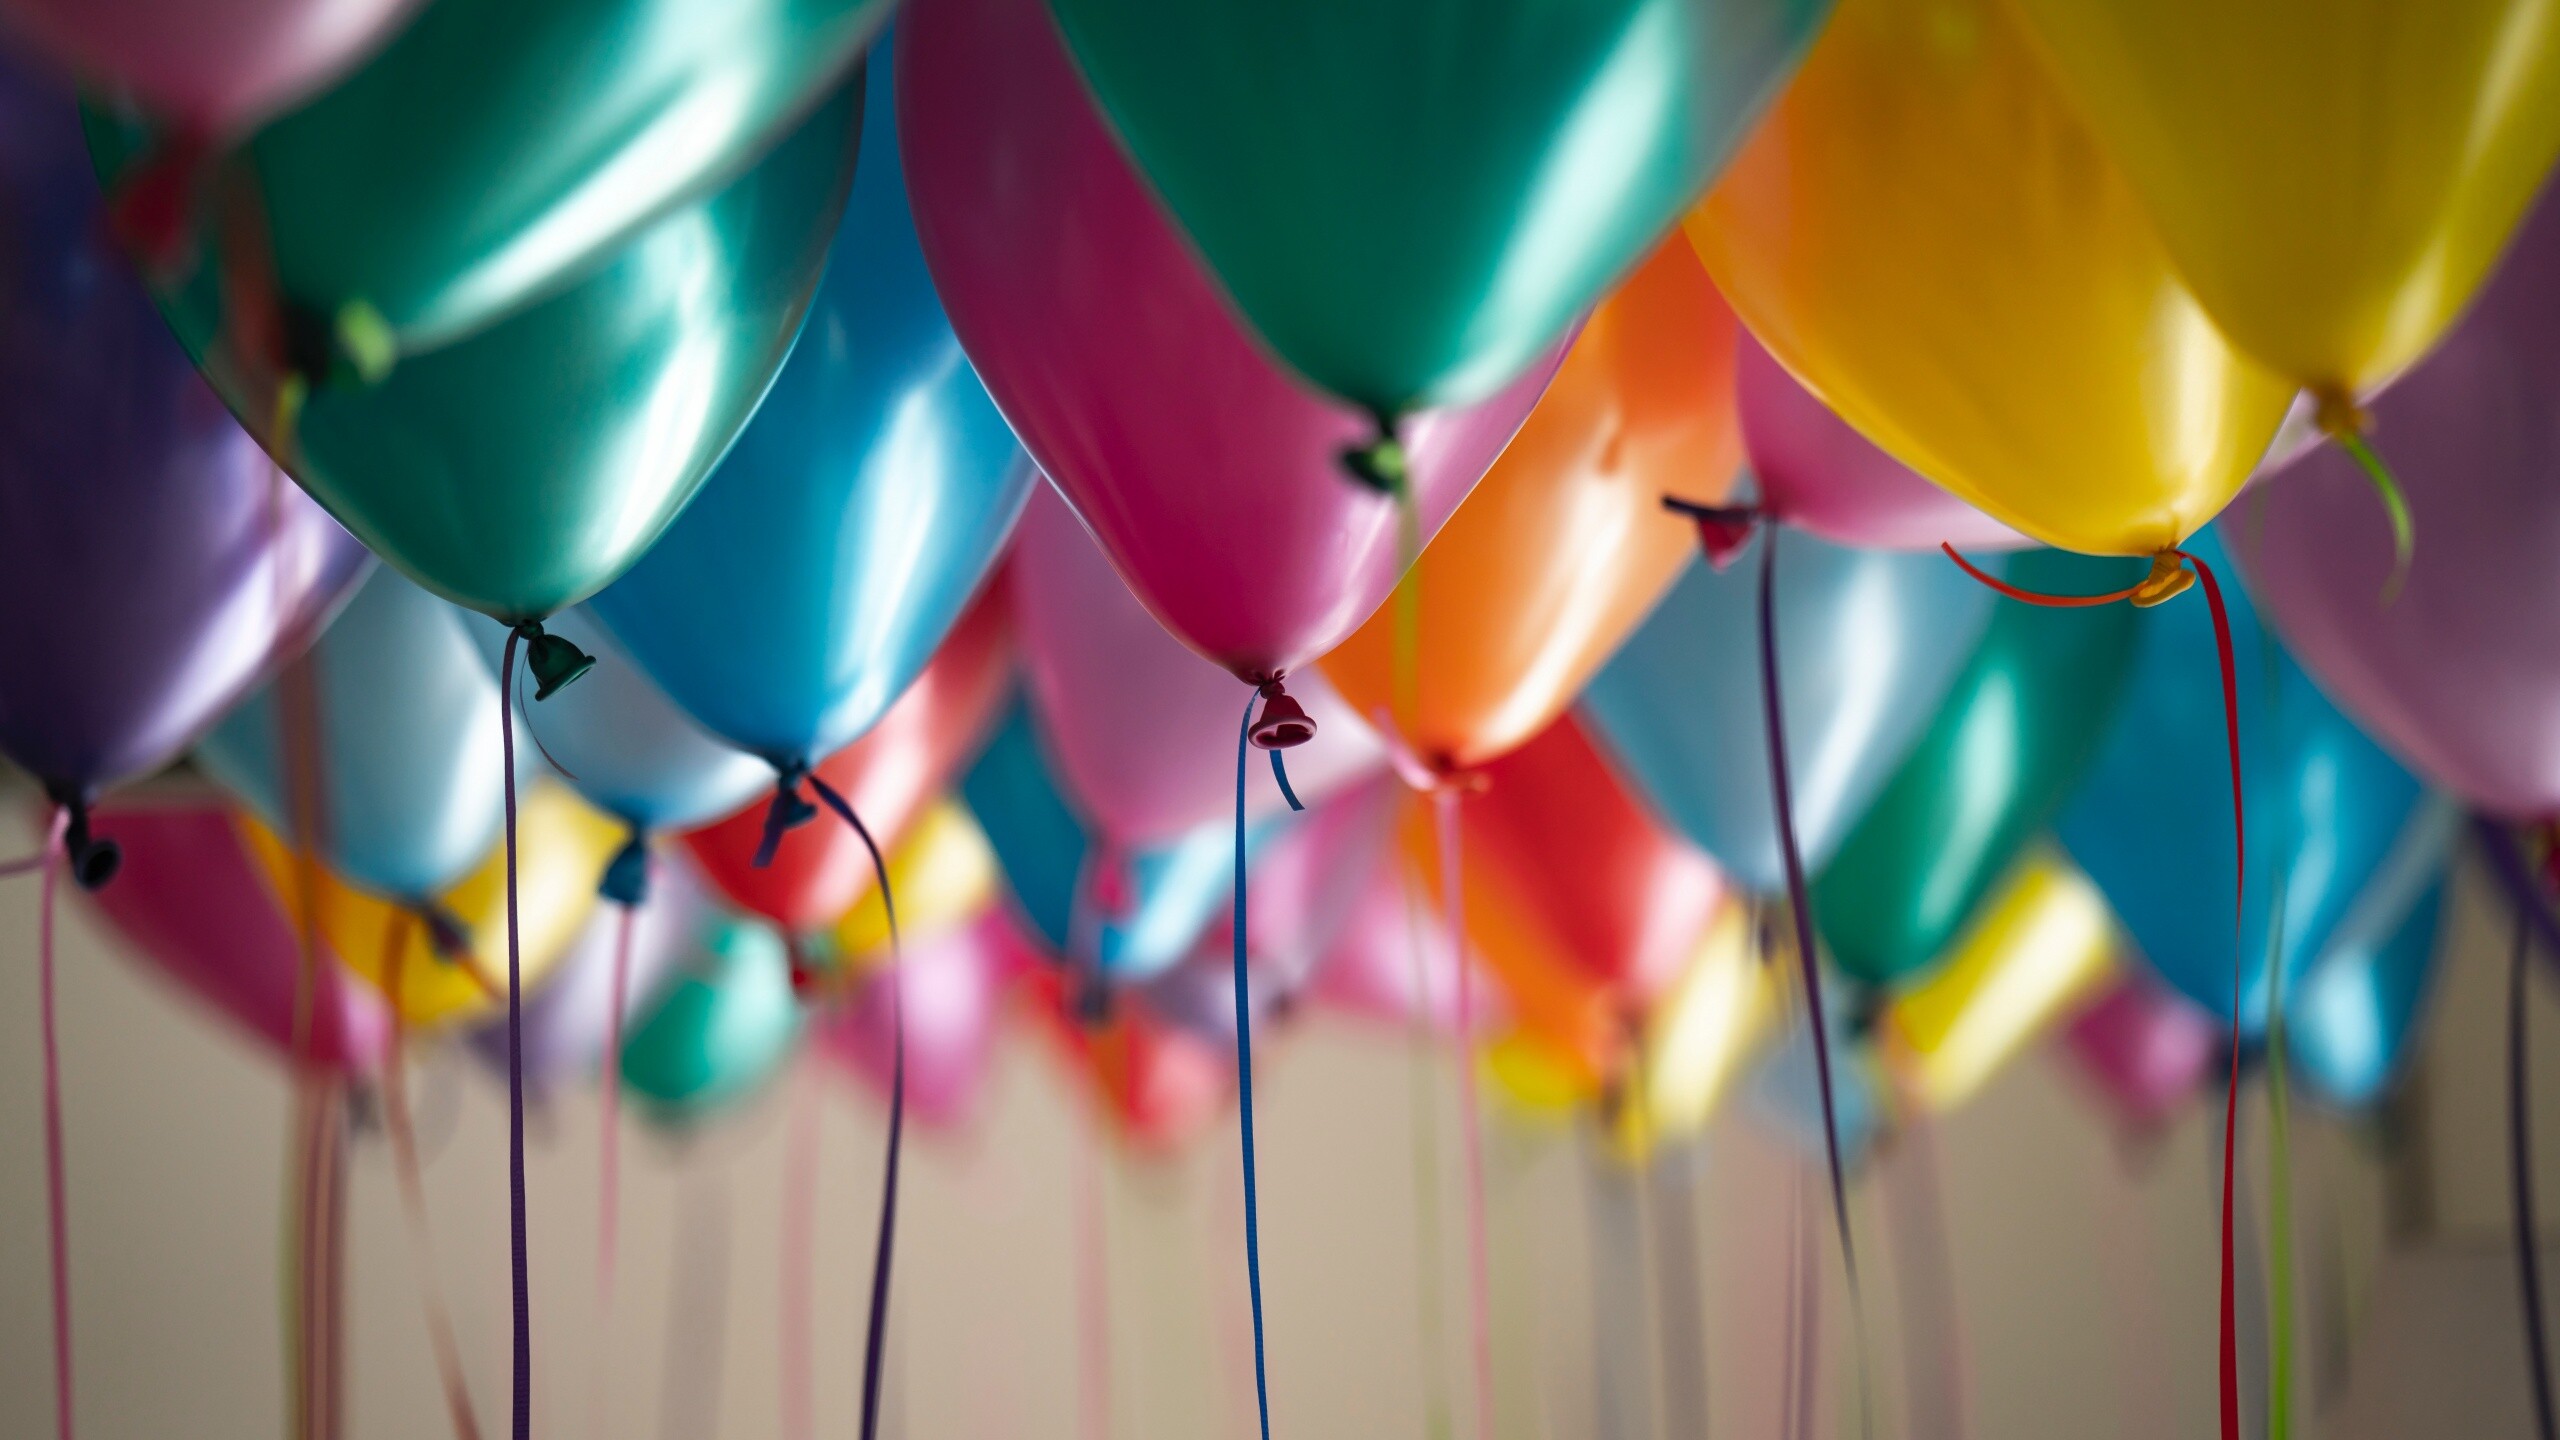 Balloons: Colorful, Birthday, Decoration, Often used as party decor. 2560x1440 HD Background.